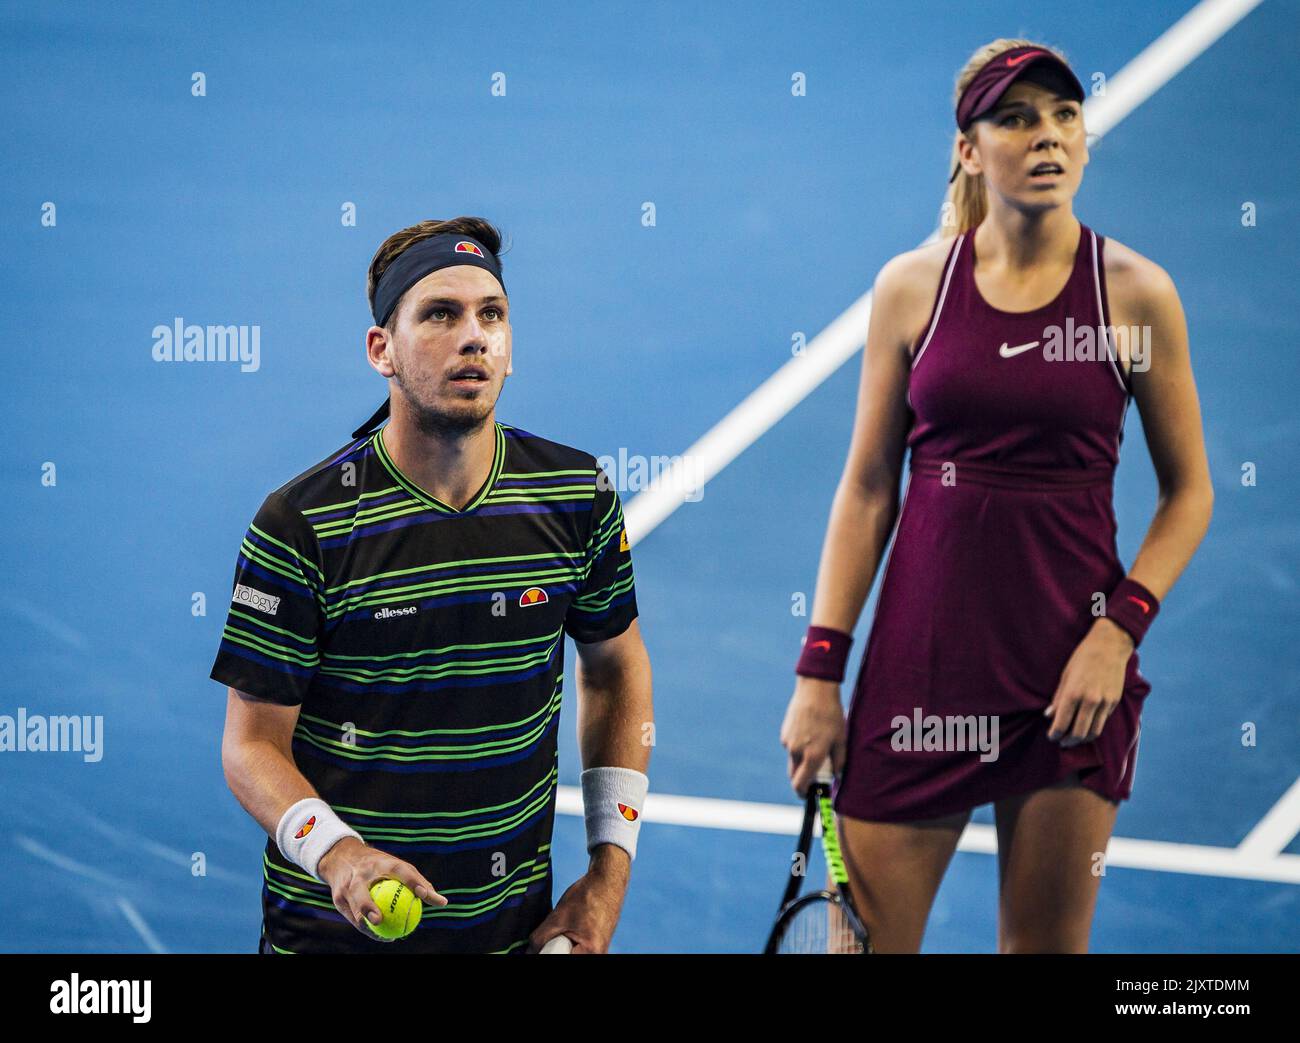 Cameron Norrie and Katie Boulter of Great Britain watch a replay during the mixed doubles match between Great Britain and Greece on day 1 of the Hopman Cup tennis tournament at RAC